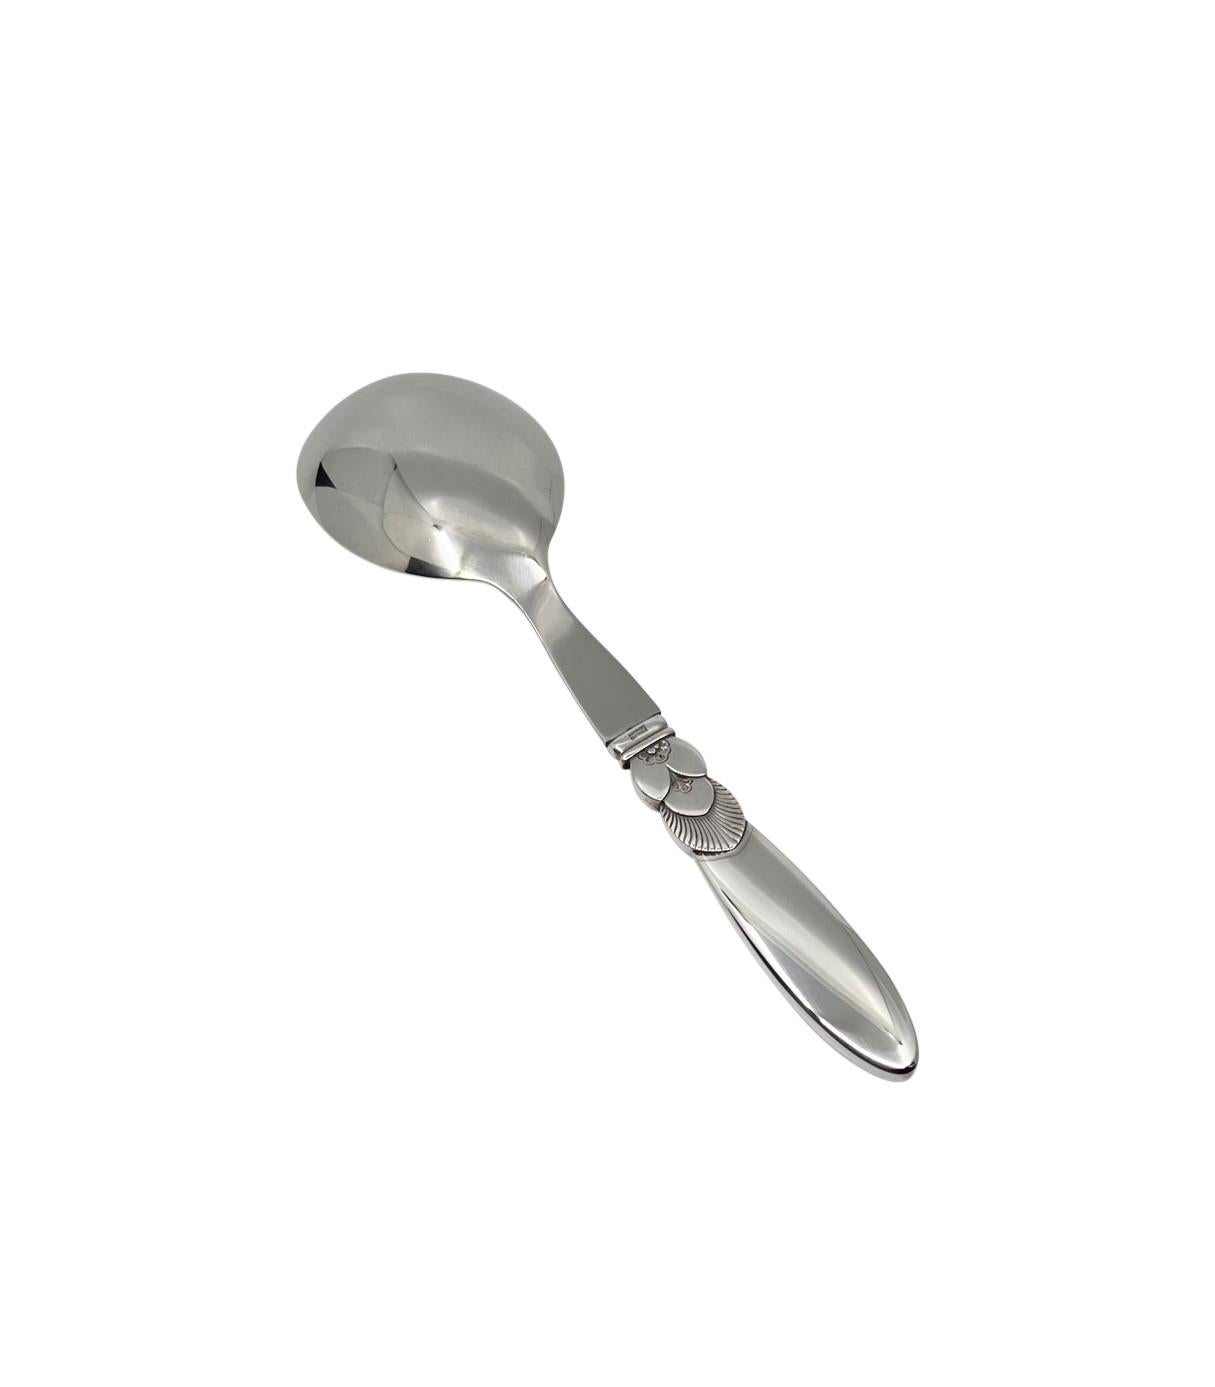 A Georg Jensen cactus sterling silver and stainless steel bowl serving spoon, item 121 in the Cactus pattern, design #30 by Gundorph Albertus from 1930.

Additional information:
Material: Sterling silver
Hallmarks: Georg Jensen hallmarks from